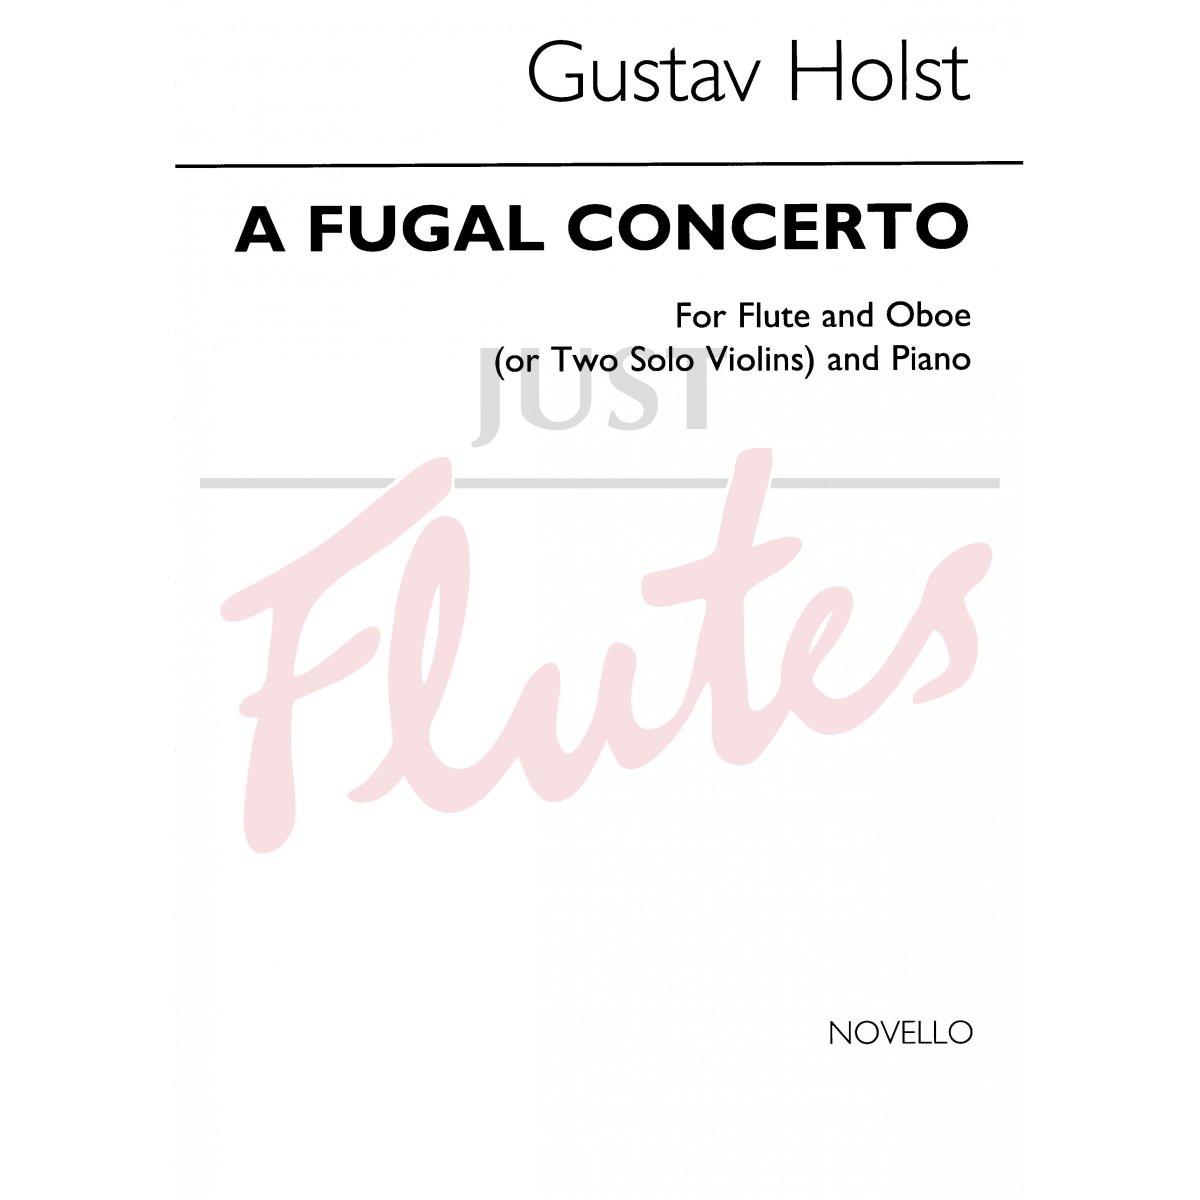 A Fugal Concerto for Flute, Oboe and Piano